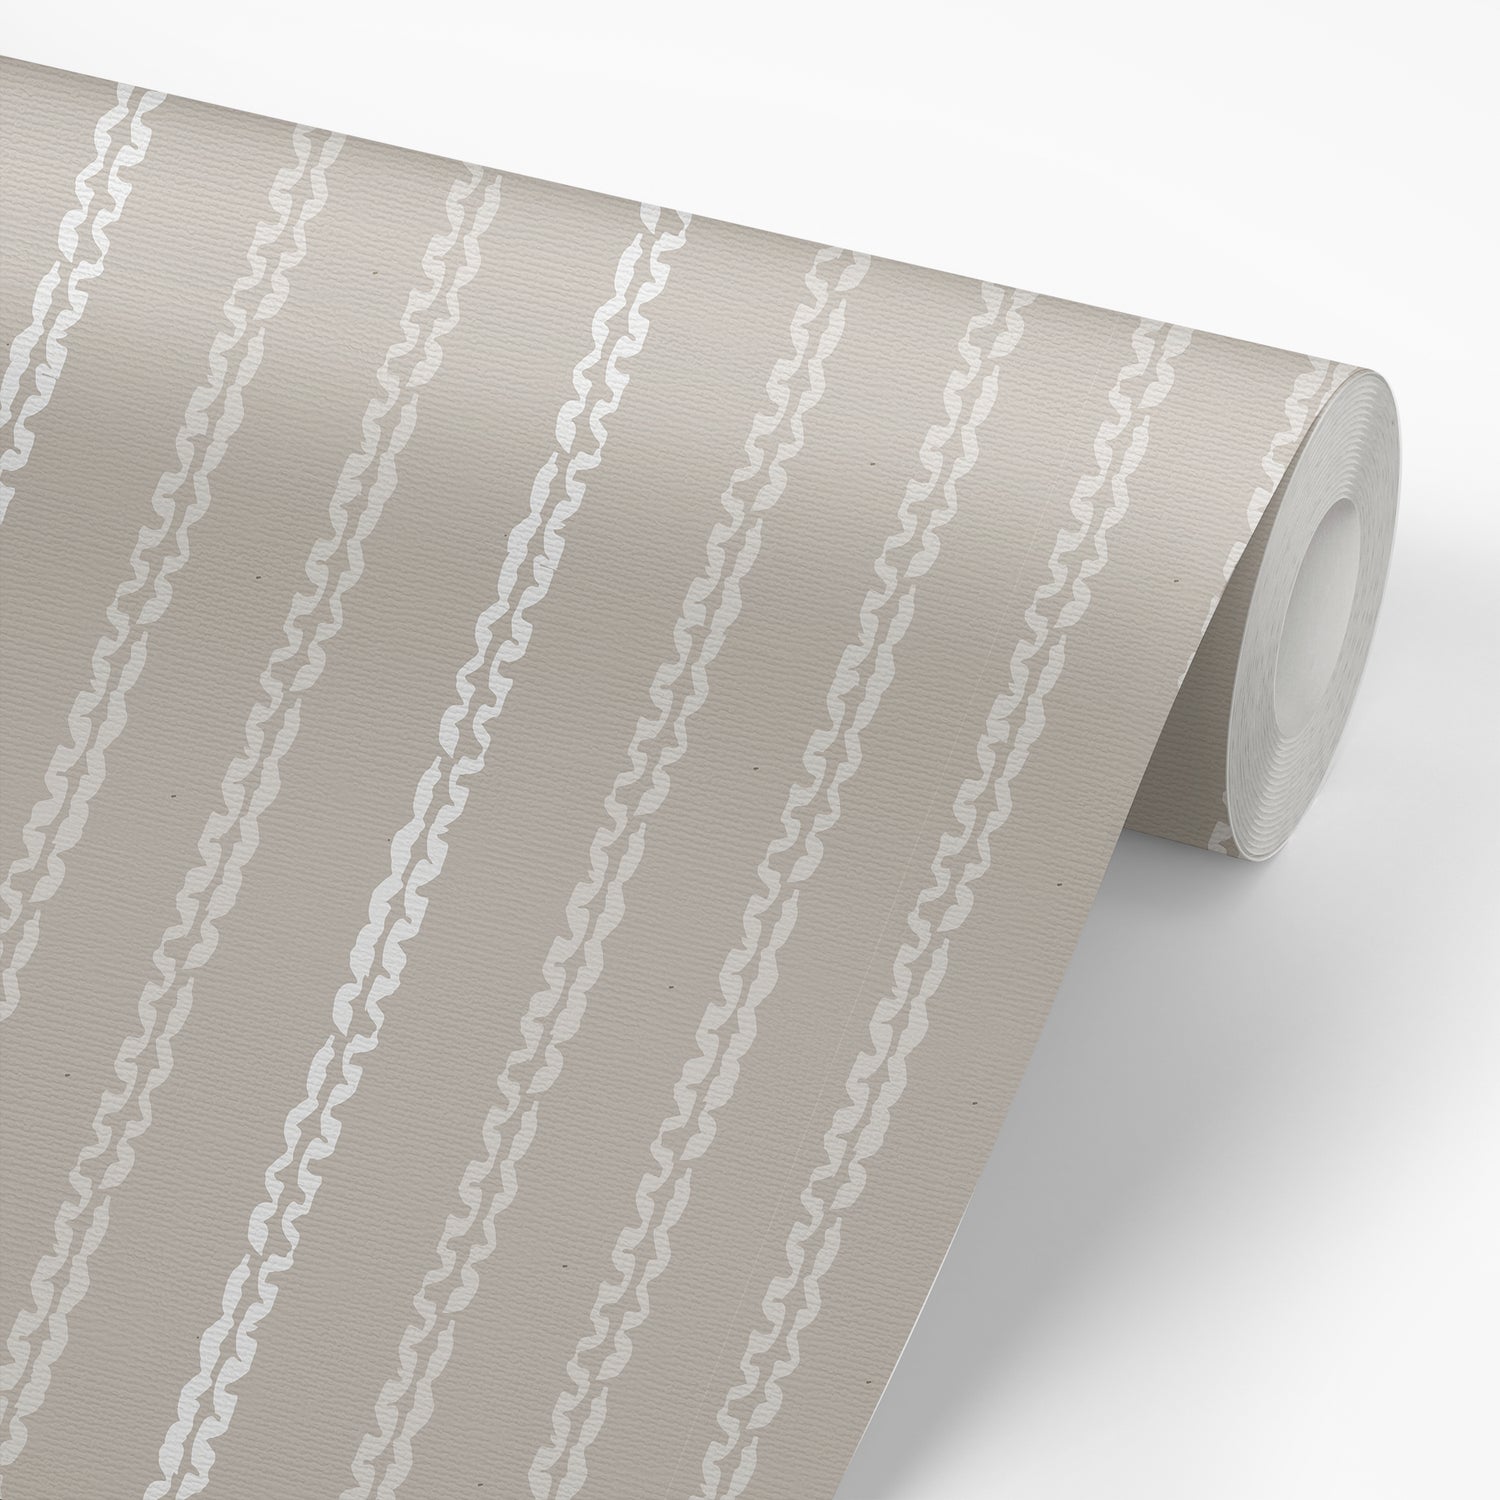 Wallpaper panel featuring Clea peel-and-stick wallpaper in clay by Jackie O'Bosky. Taupe and cream vertical stripes.